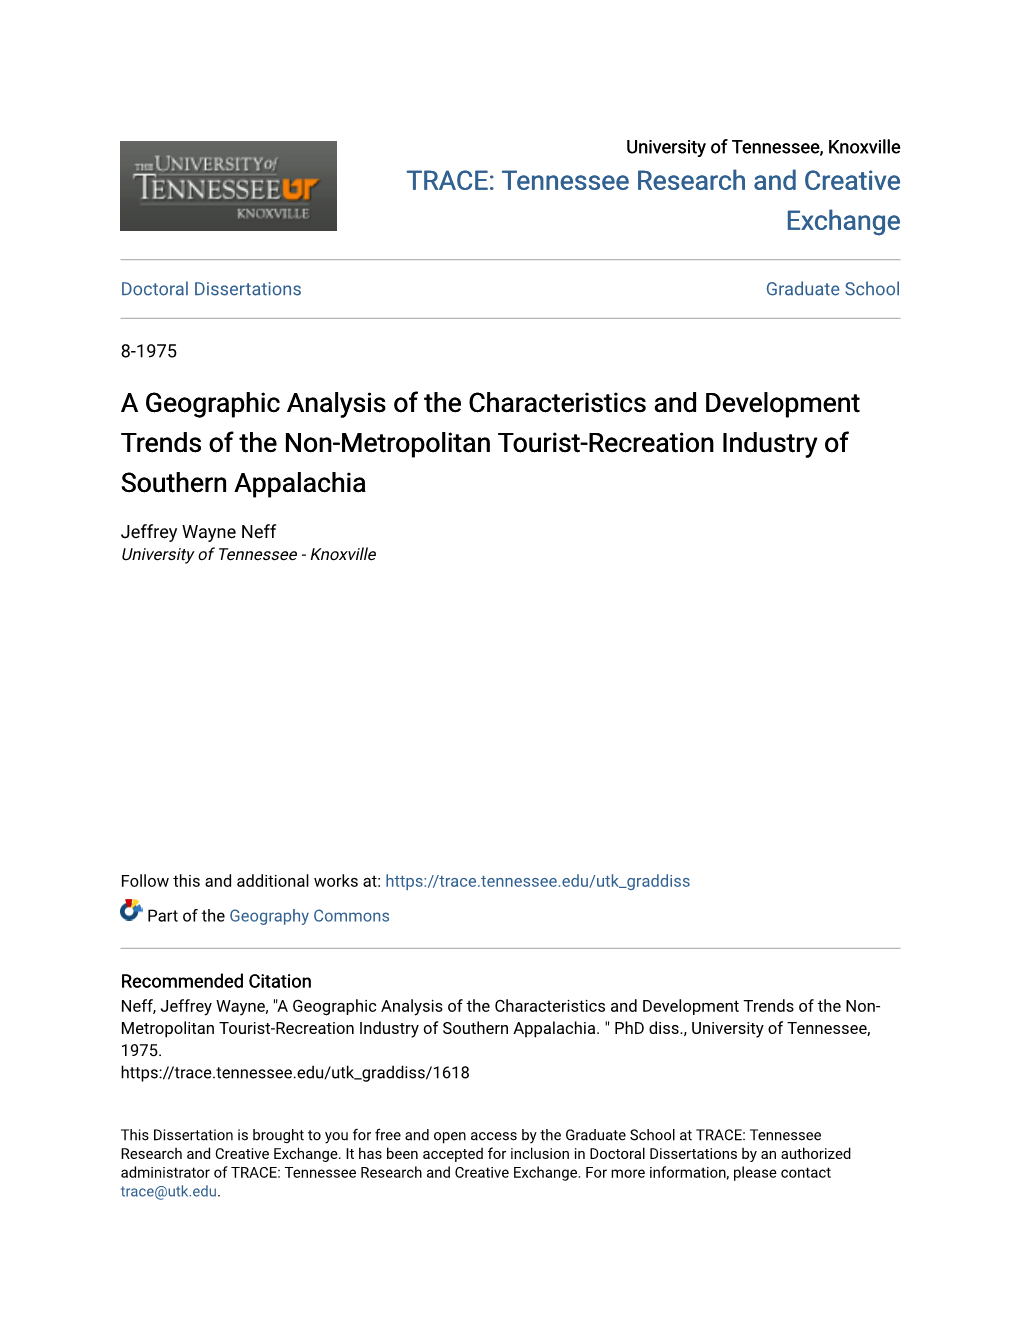 A Geographic Analysis of the Characteristics and Development Trends of the Non-Metropolitan Tourist-Recreation Industry of Southern Appalachia